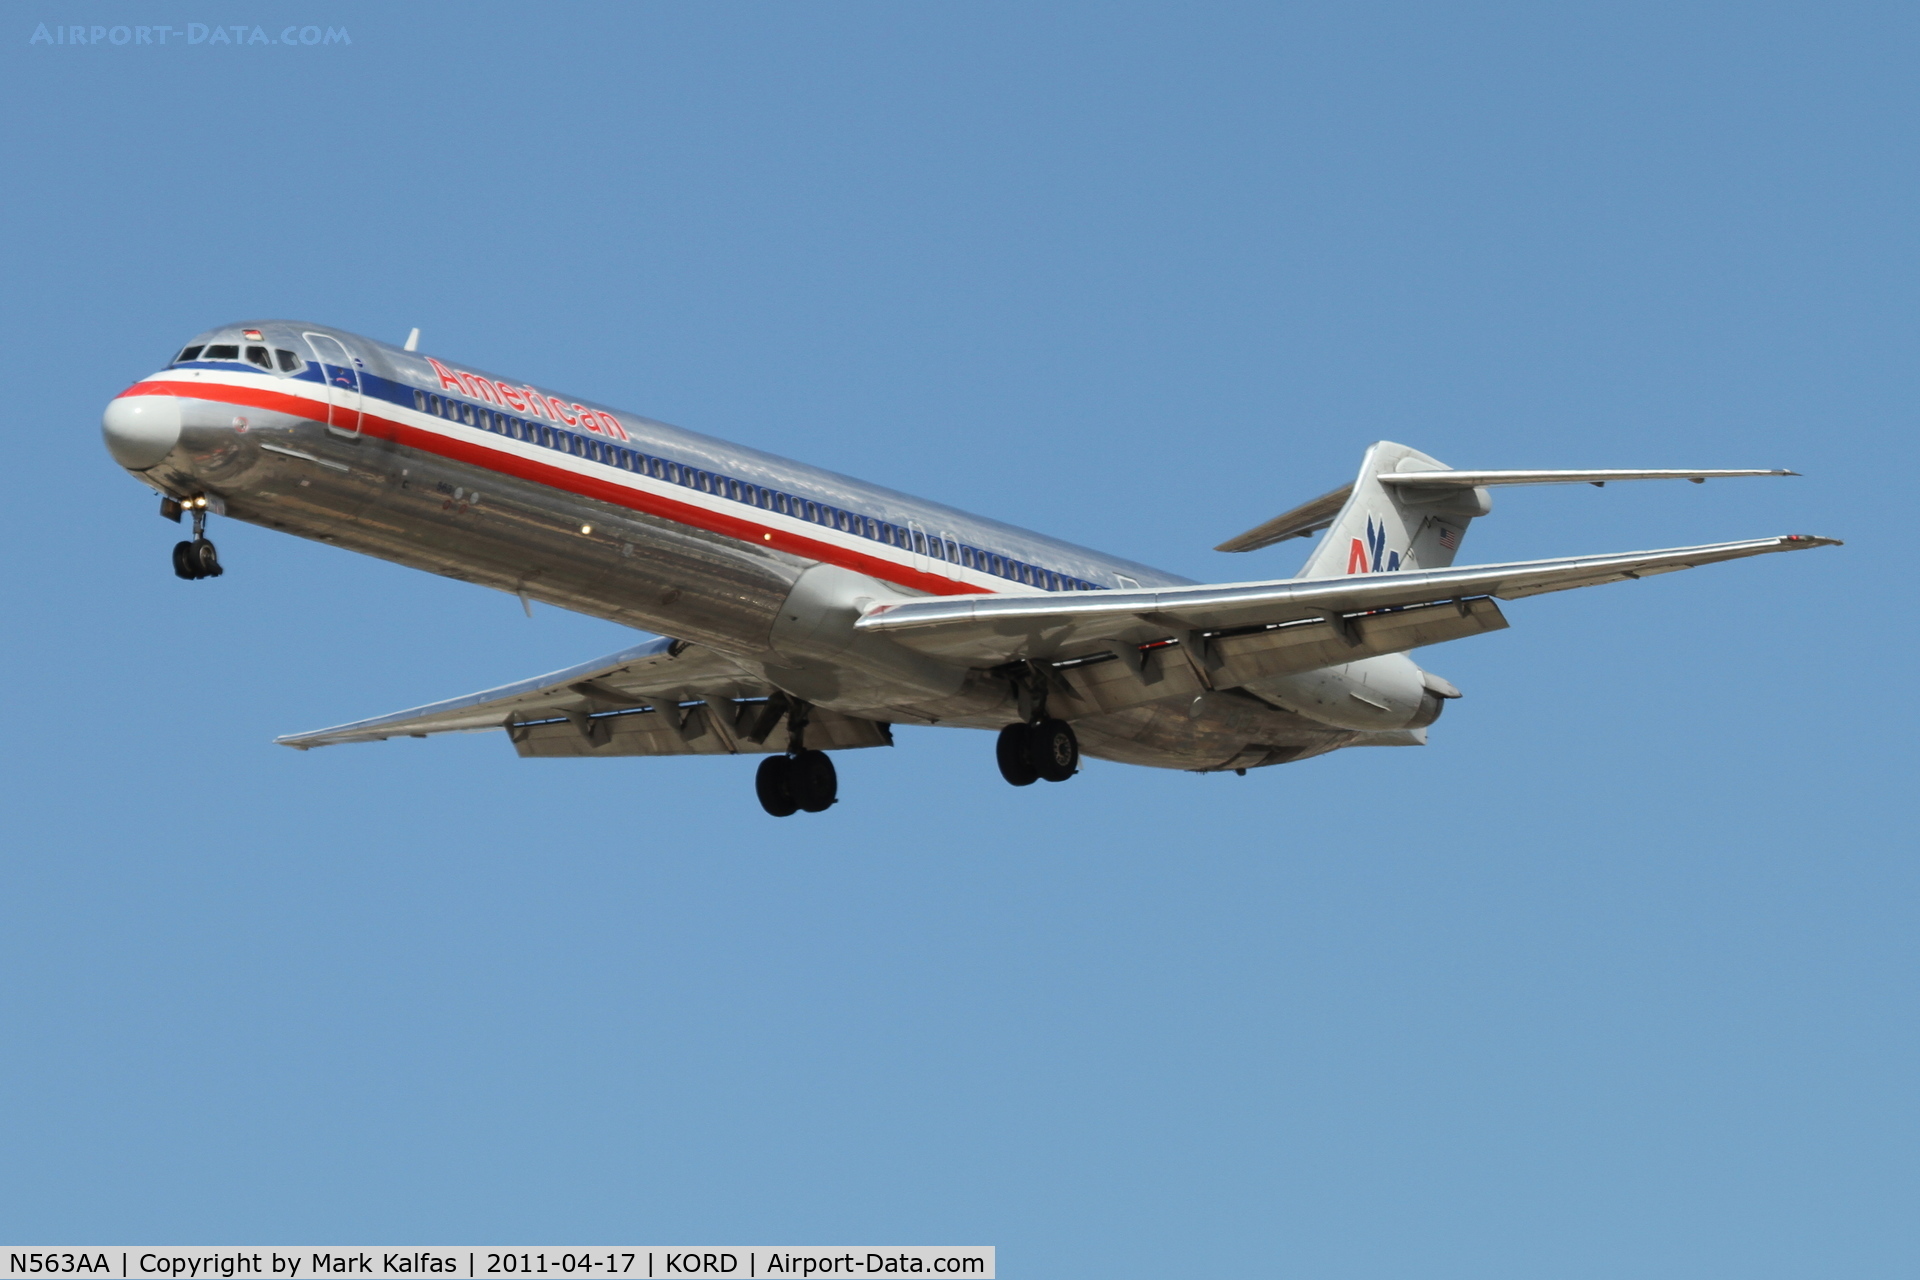 N563AA, 1987 McDonnell Douglas MD-83 (DC-9-83) C/N 49345, American Airlines McDonnell Douglas DC-9-83, AAL593 arriving from KMSP, RWY 28 approach KORD.